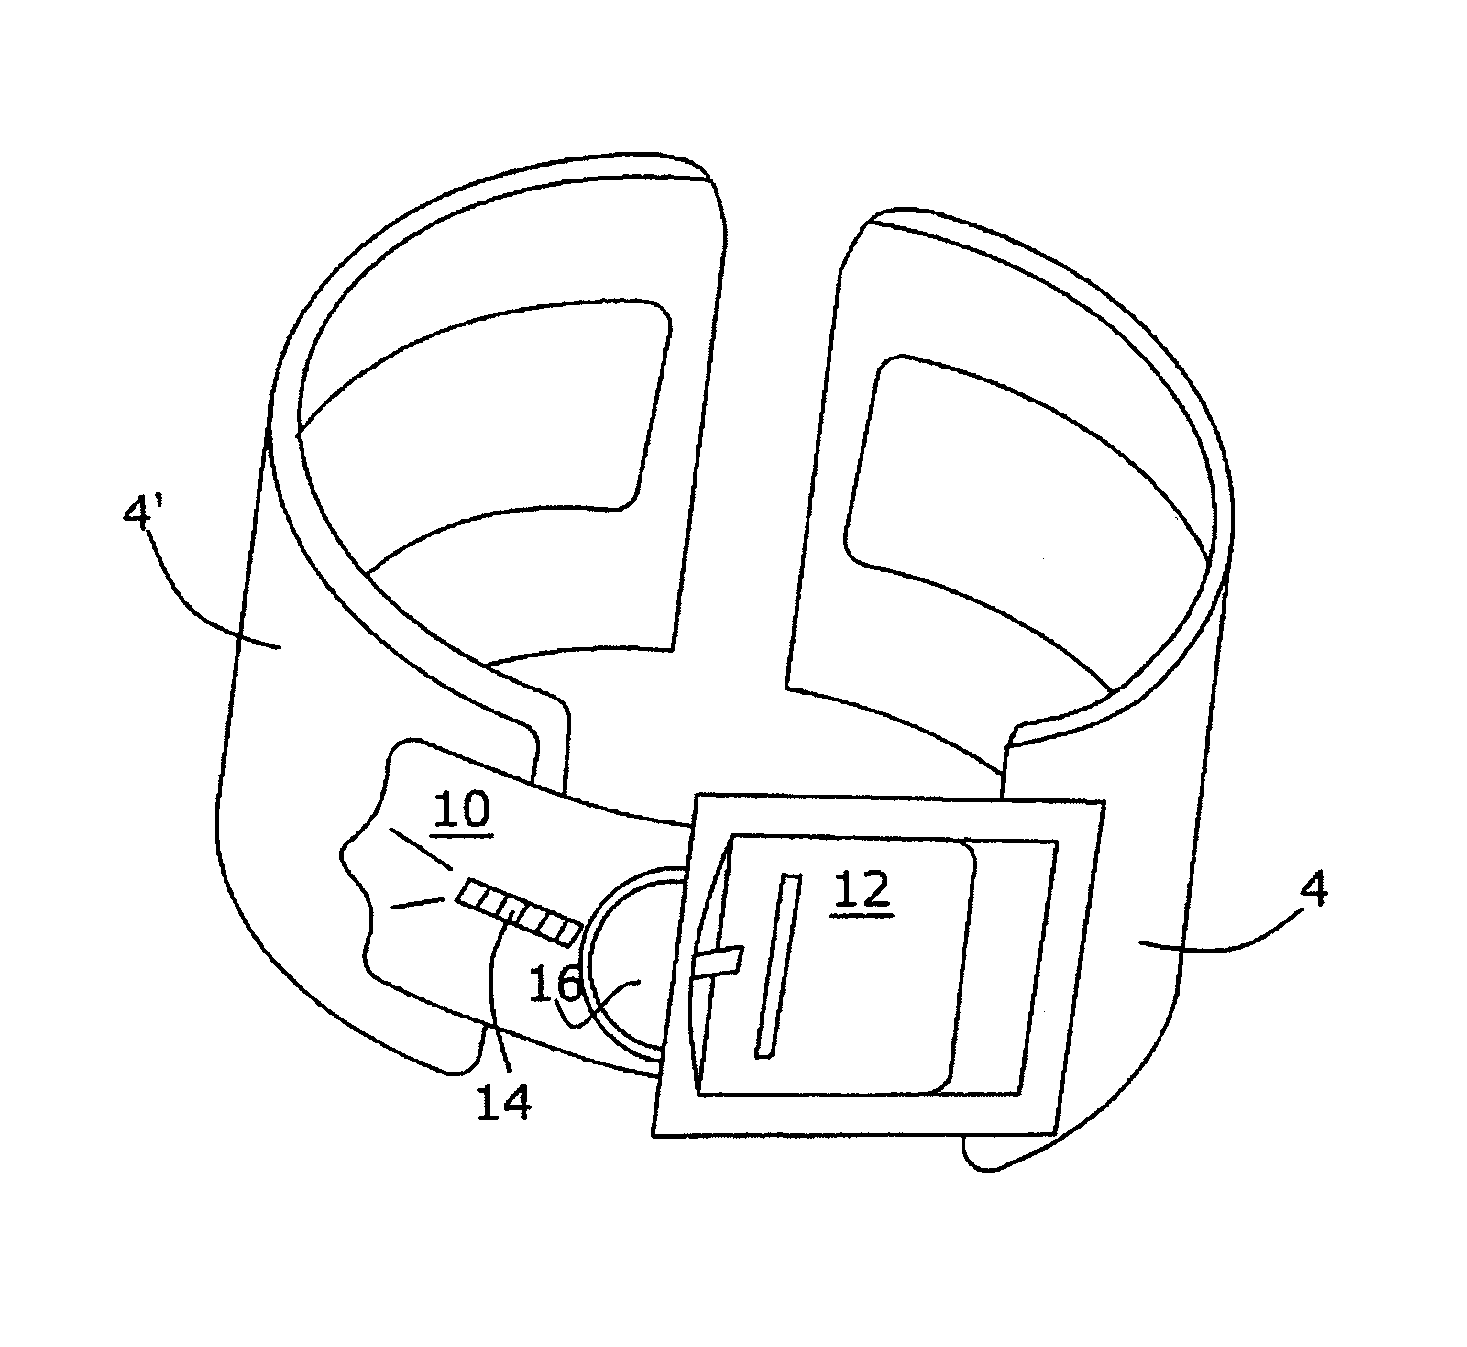 Device for muscle stimulation